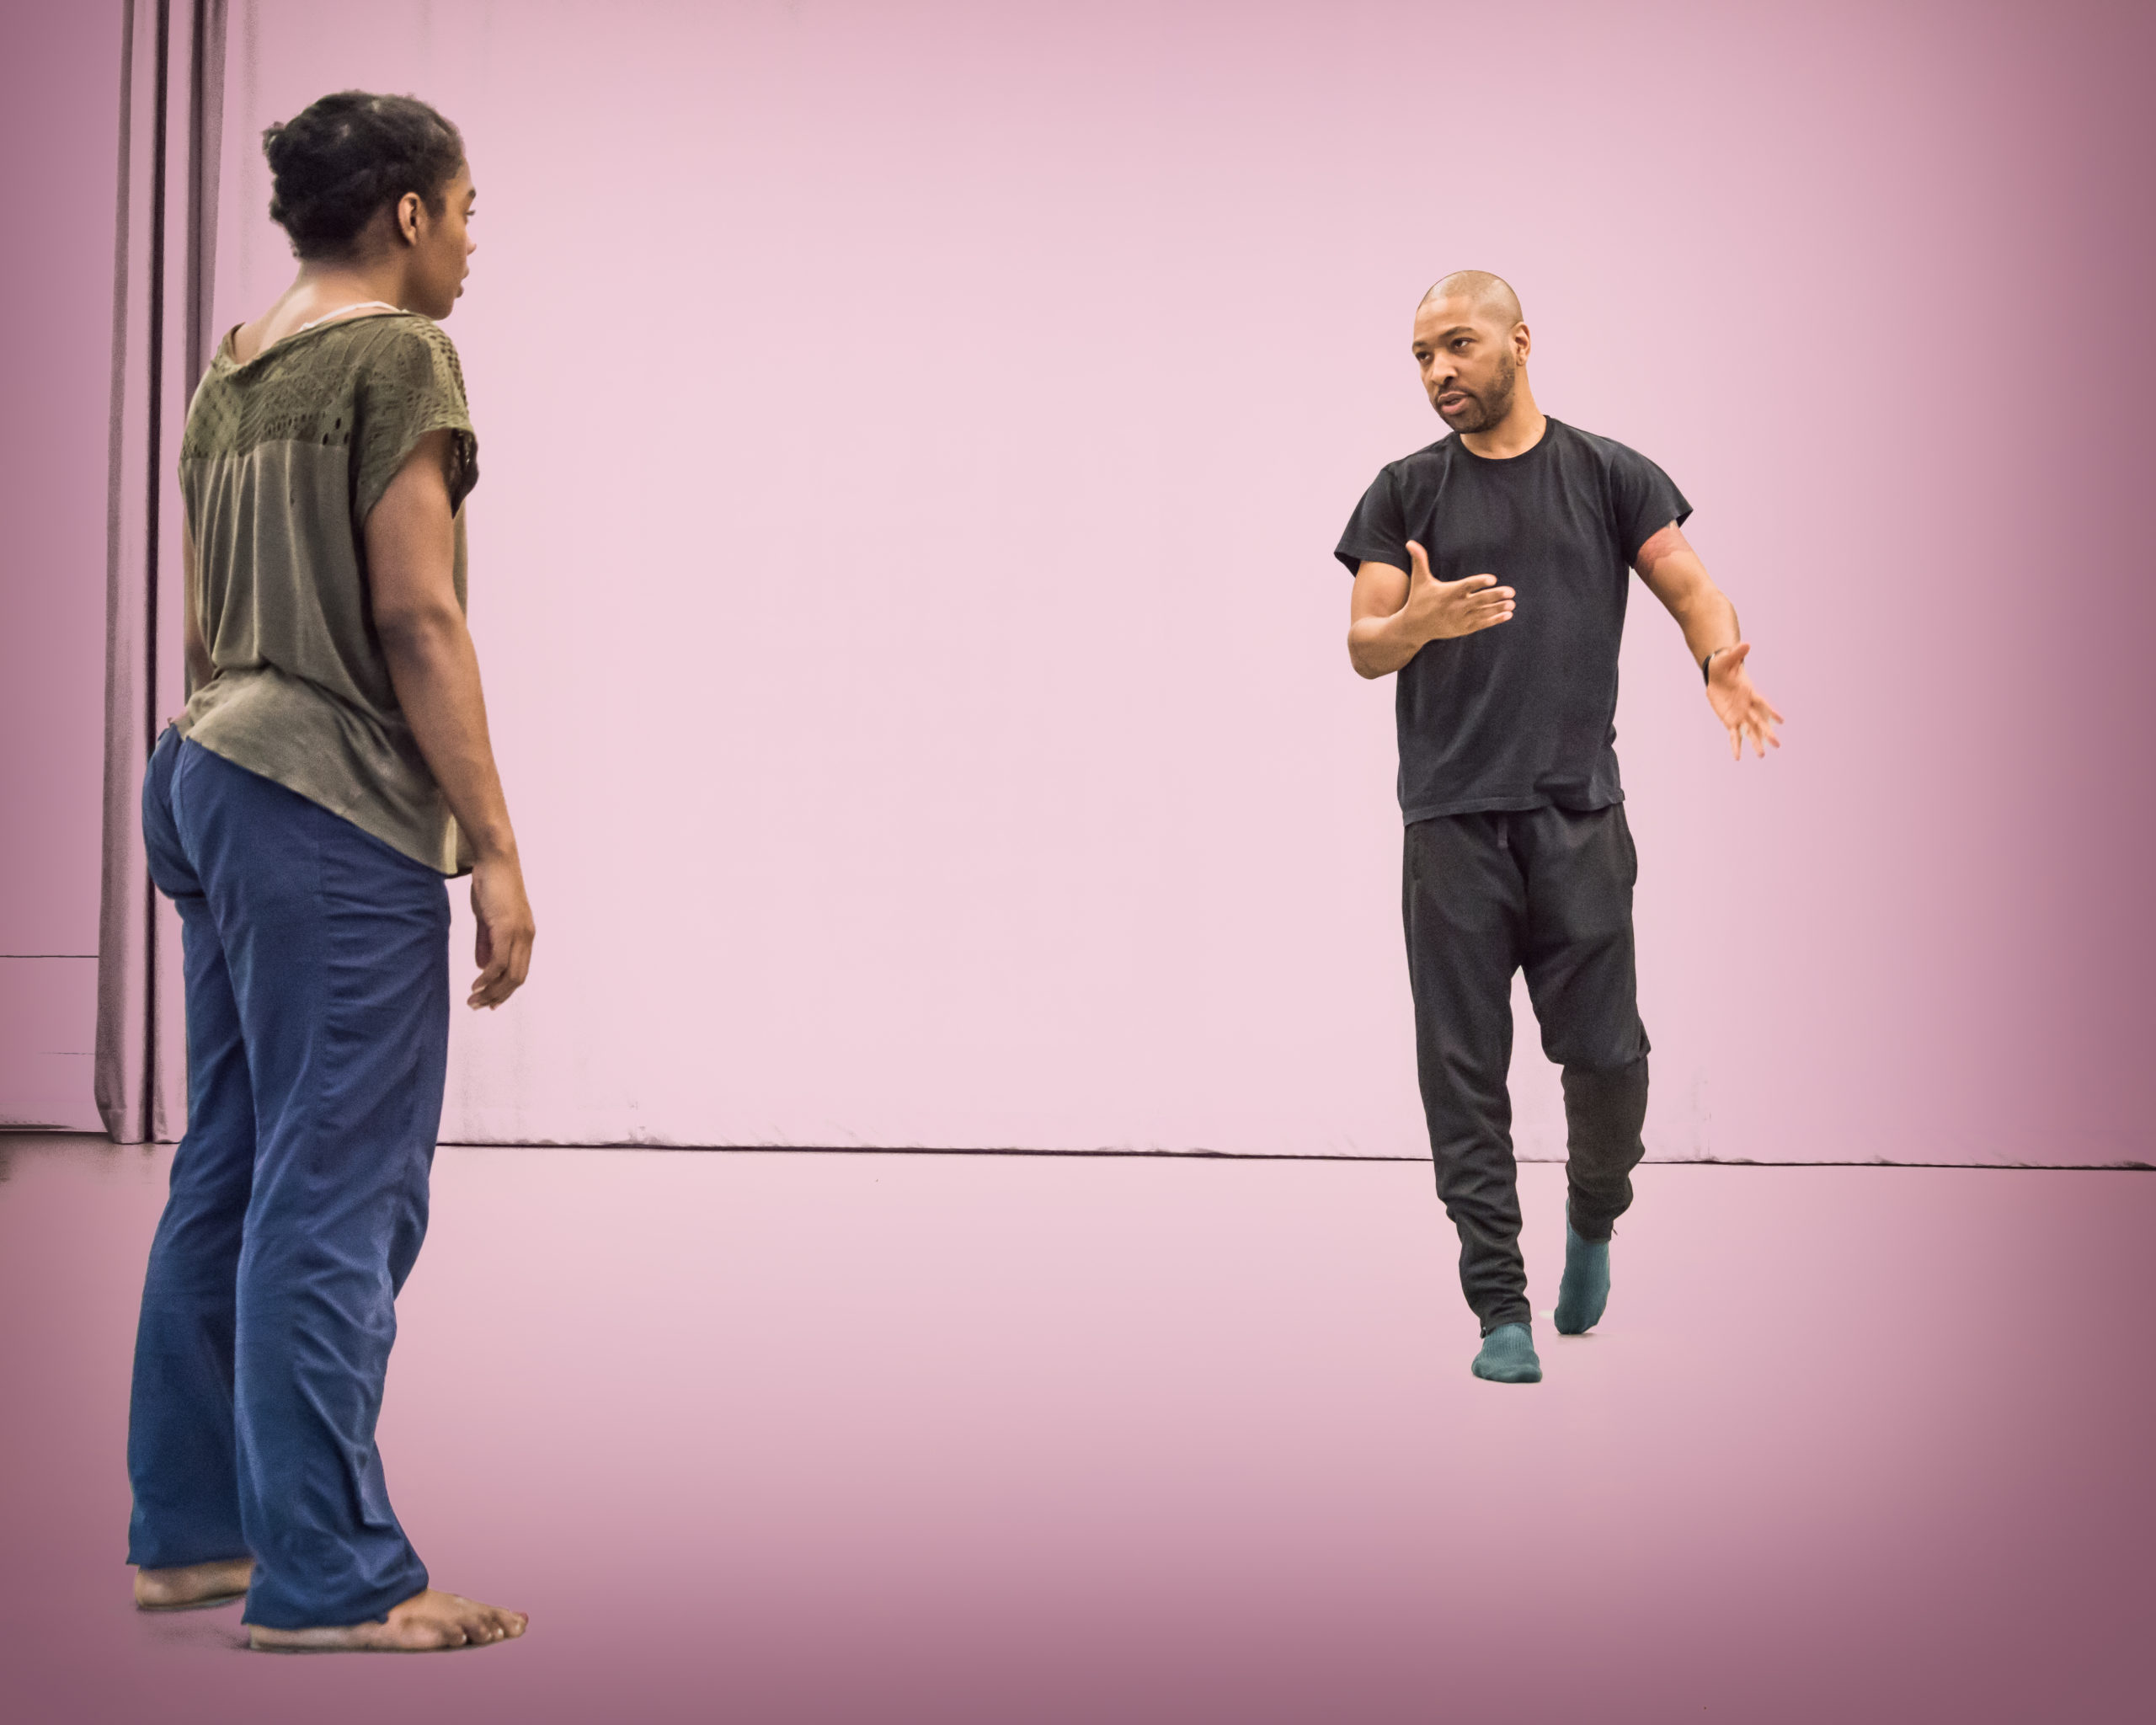 Kyle Abraham rehearses with Kayla Farrish. The photo has a pink background